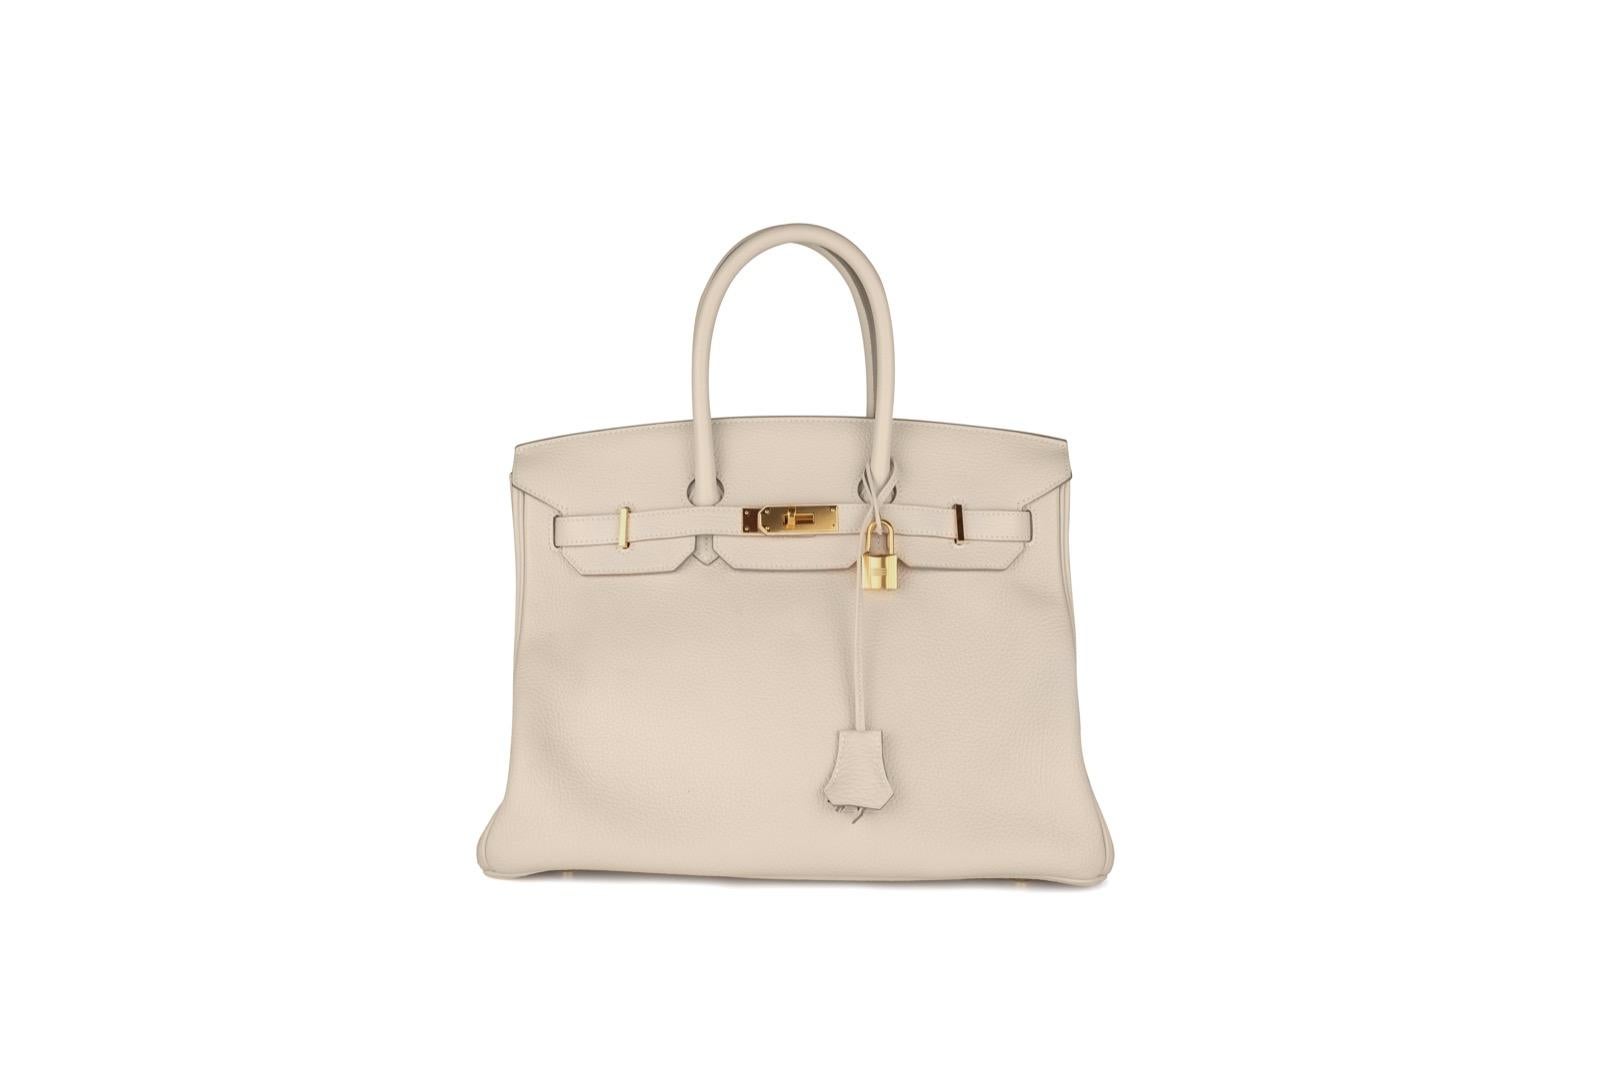 Sublime handbag Hermes Birkin 35 cm in beige togo leather, gold hardware, beige leather double handle allowing a hand carry.

Flap closure.
Beige leather lining, zipped pocket, patch pocket.
Sold with zipper, key, padlock, bell, dust bag and